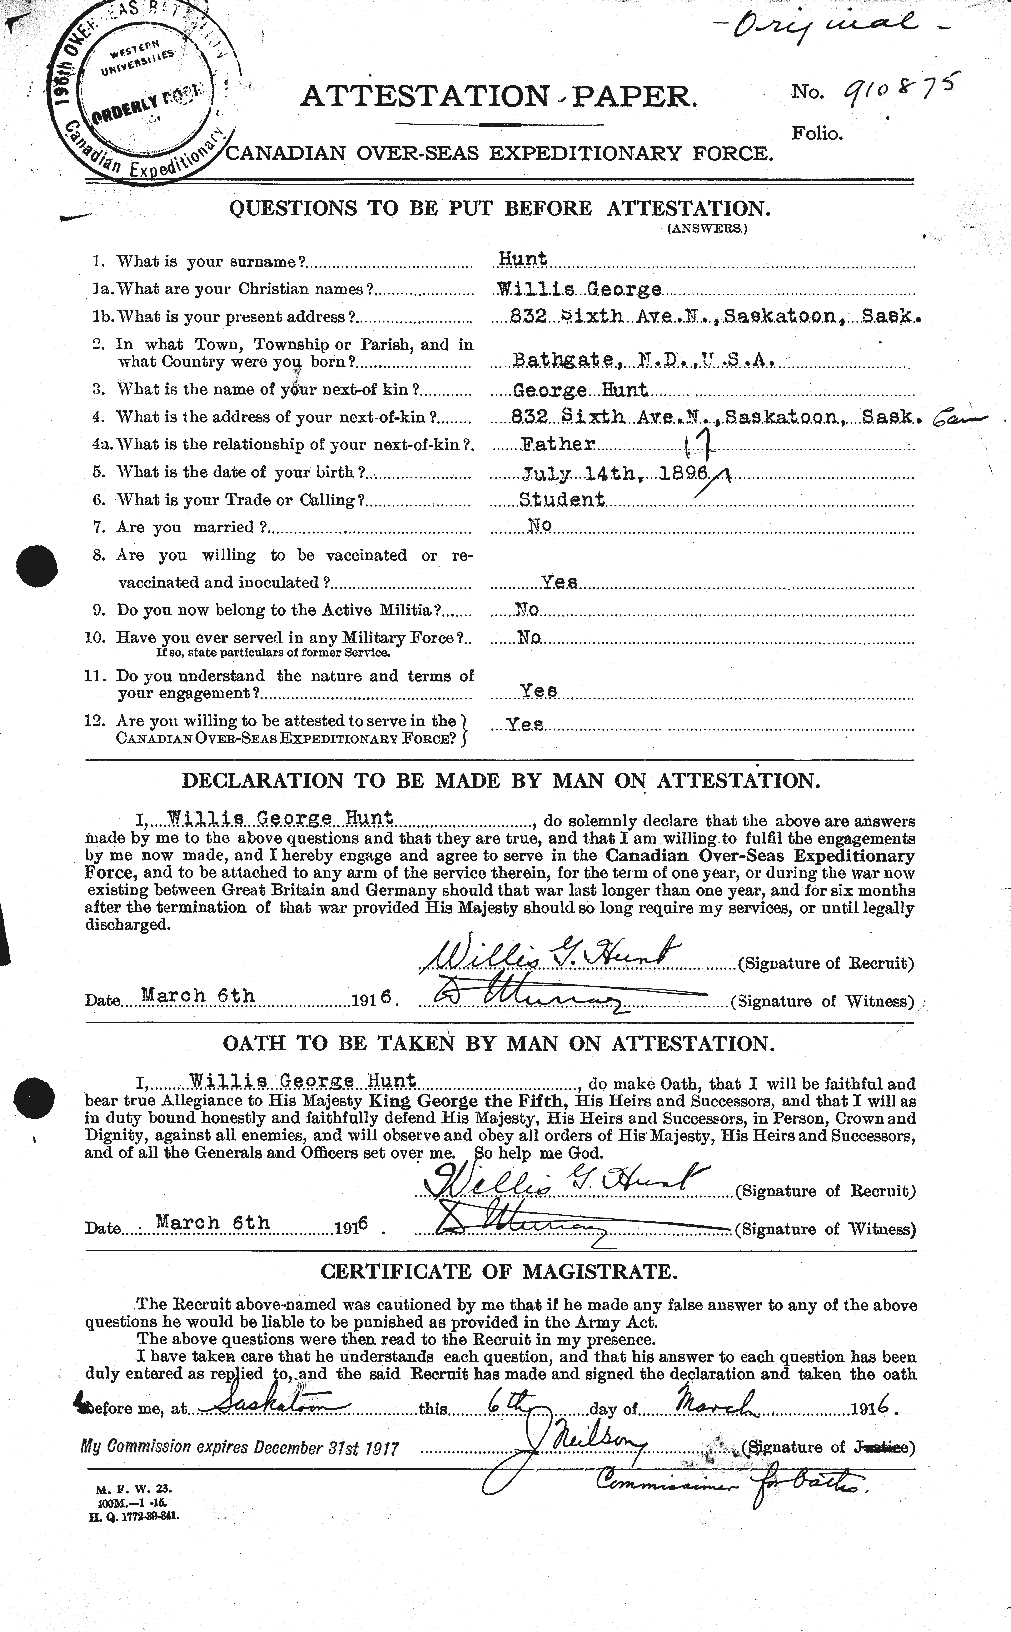 Personnel Records of the First World War - CEF 408937a